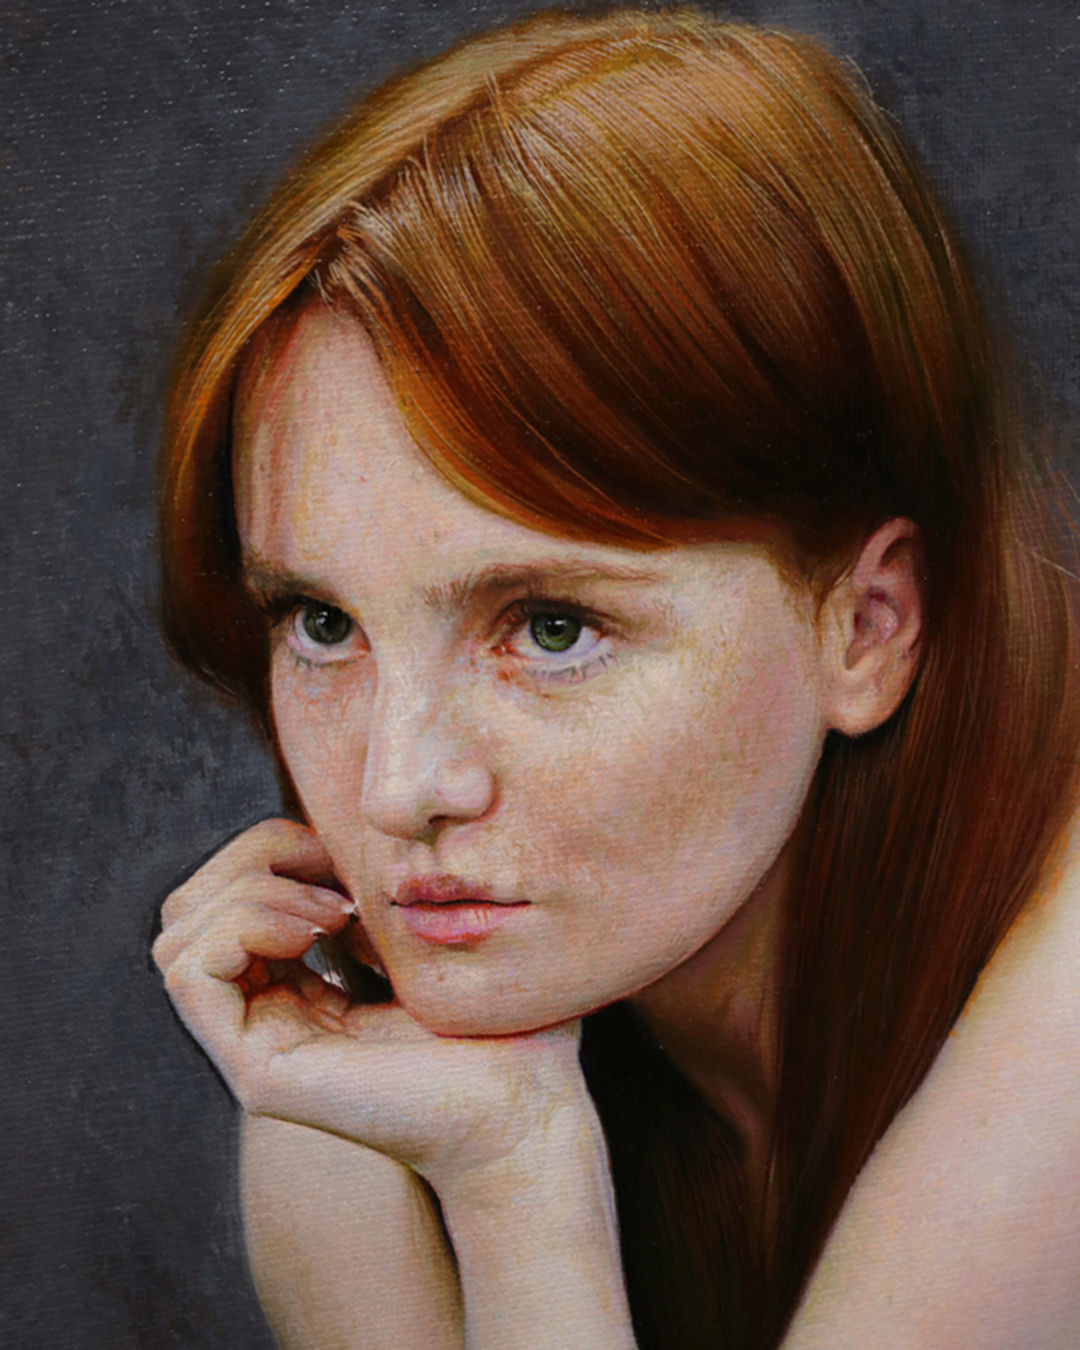 Contemporary realism artists - Detail of "Thinker" by Anna Wypych